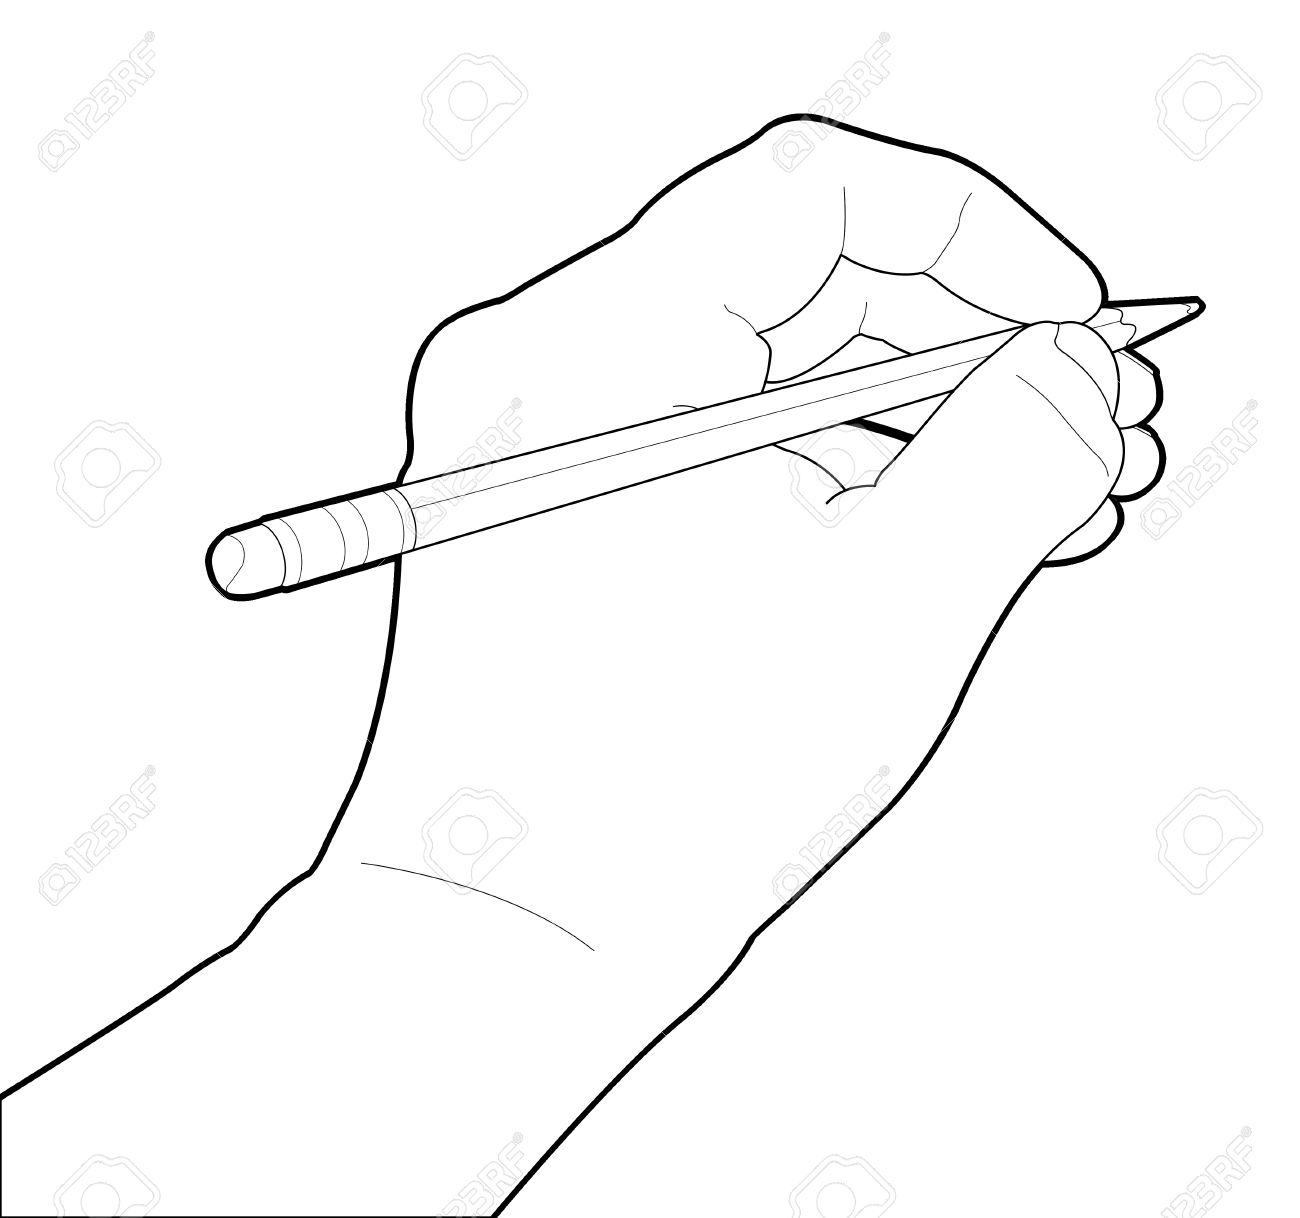 Hand Holding A Pencil Drawing at GetDrawings Free download